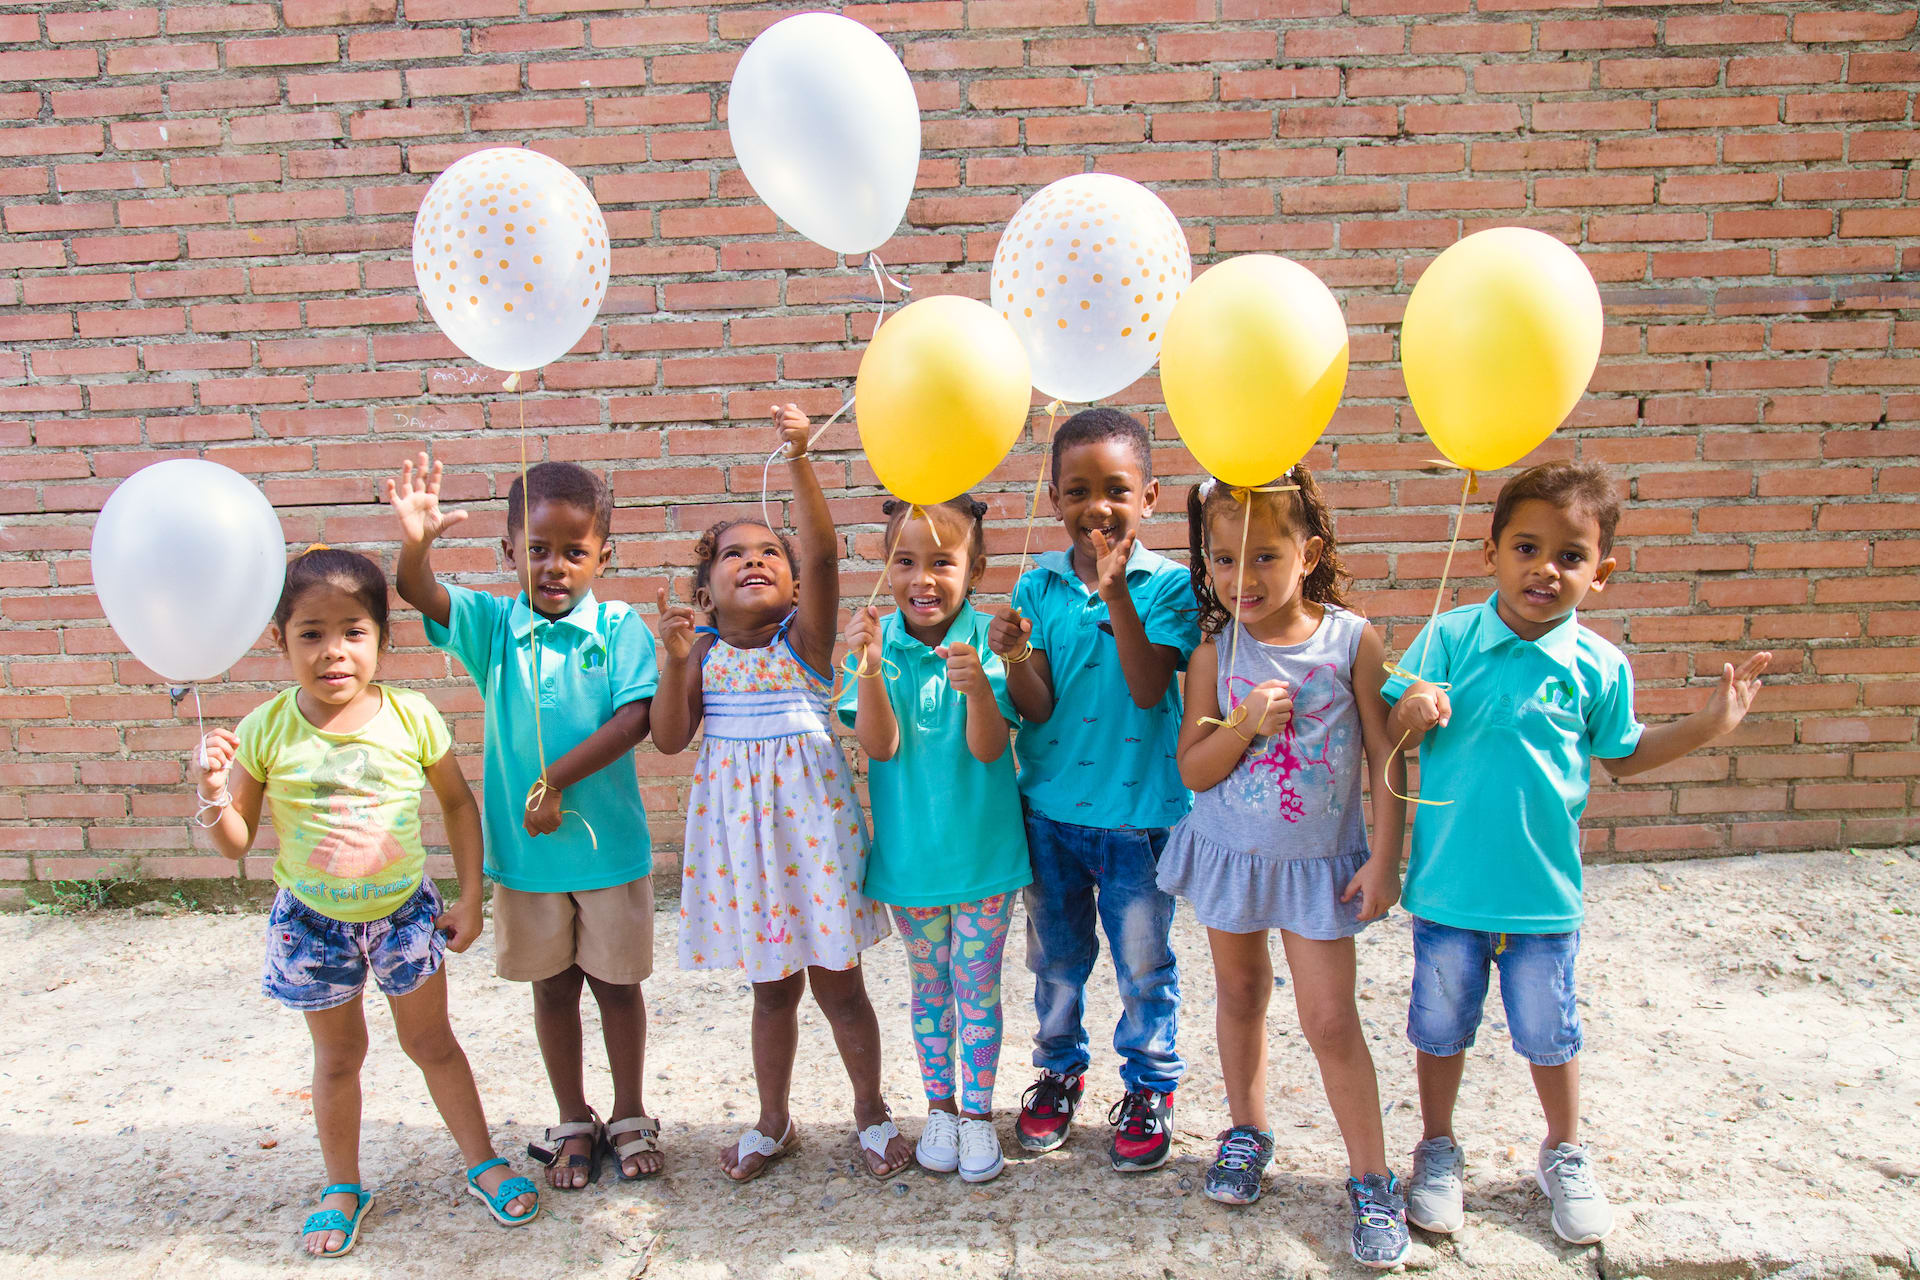 A group of children standing in a row holding yellow and white balloons.